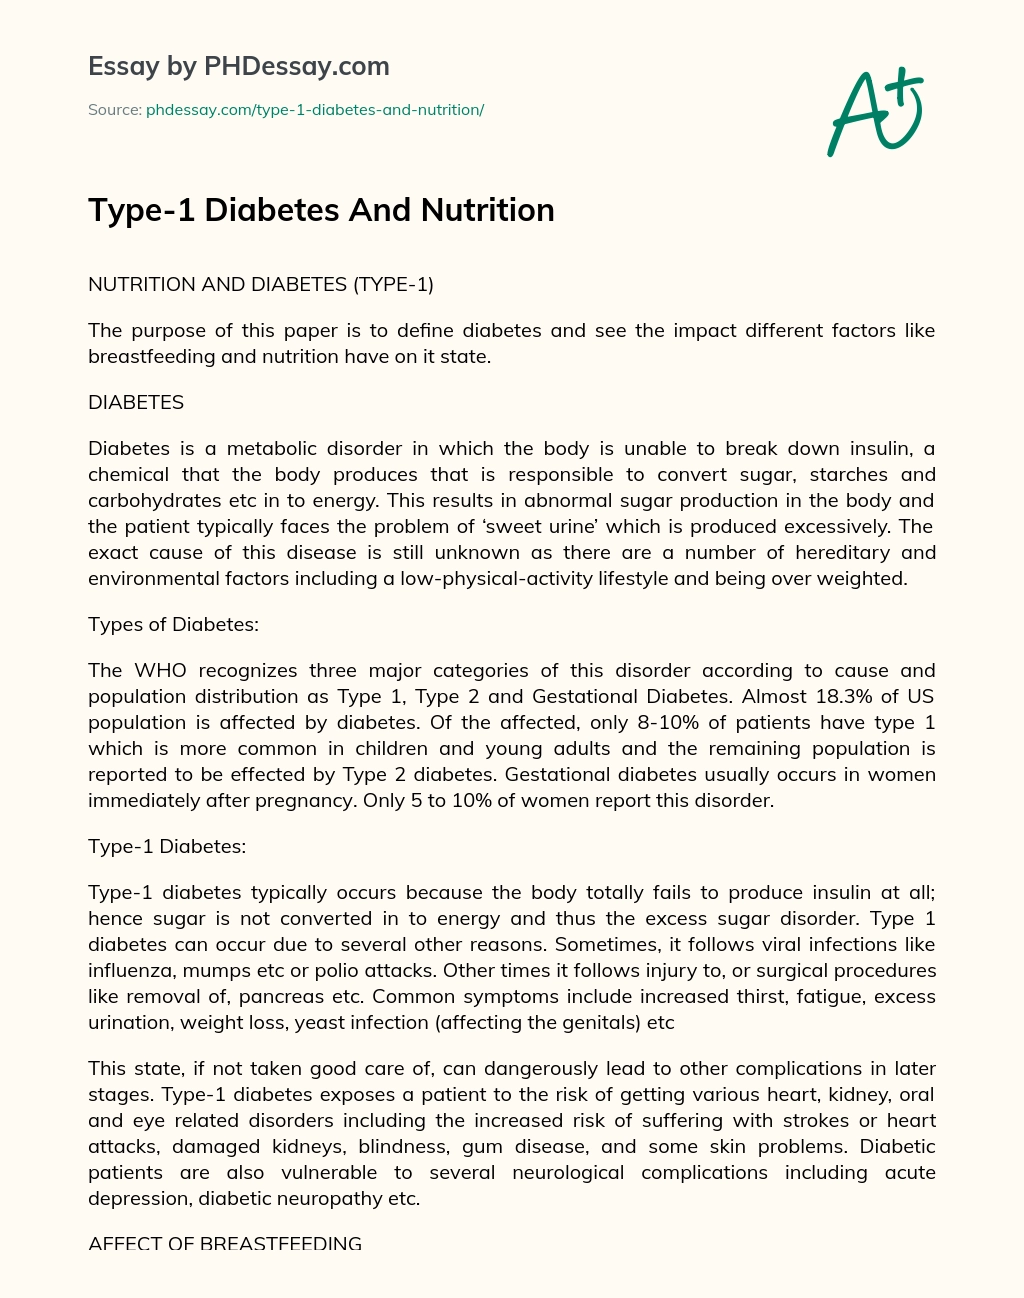 Type-1 Diabetes And Nutrition essay